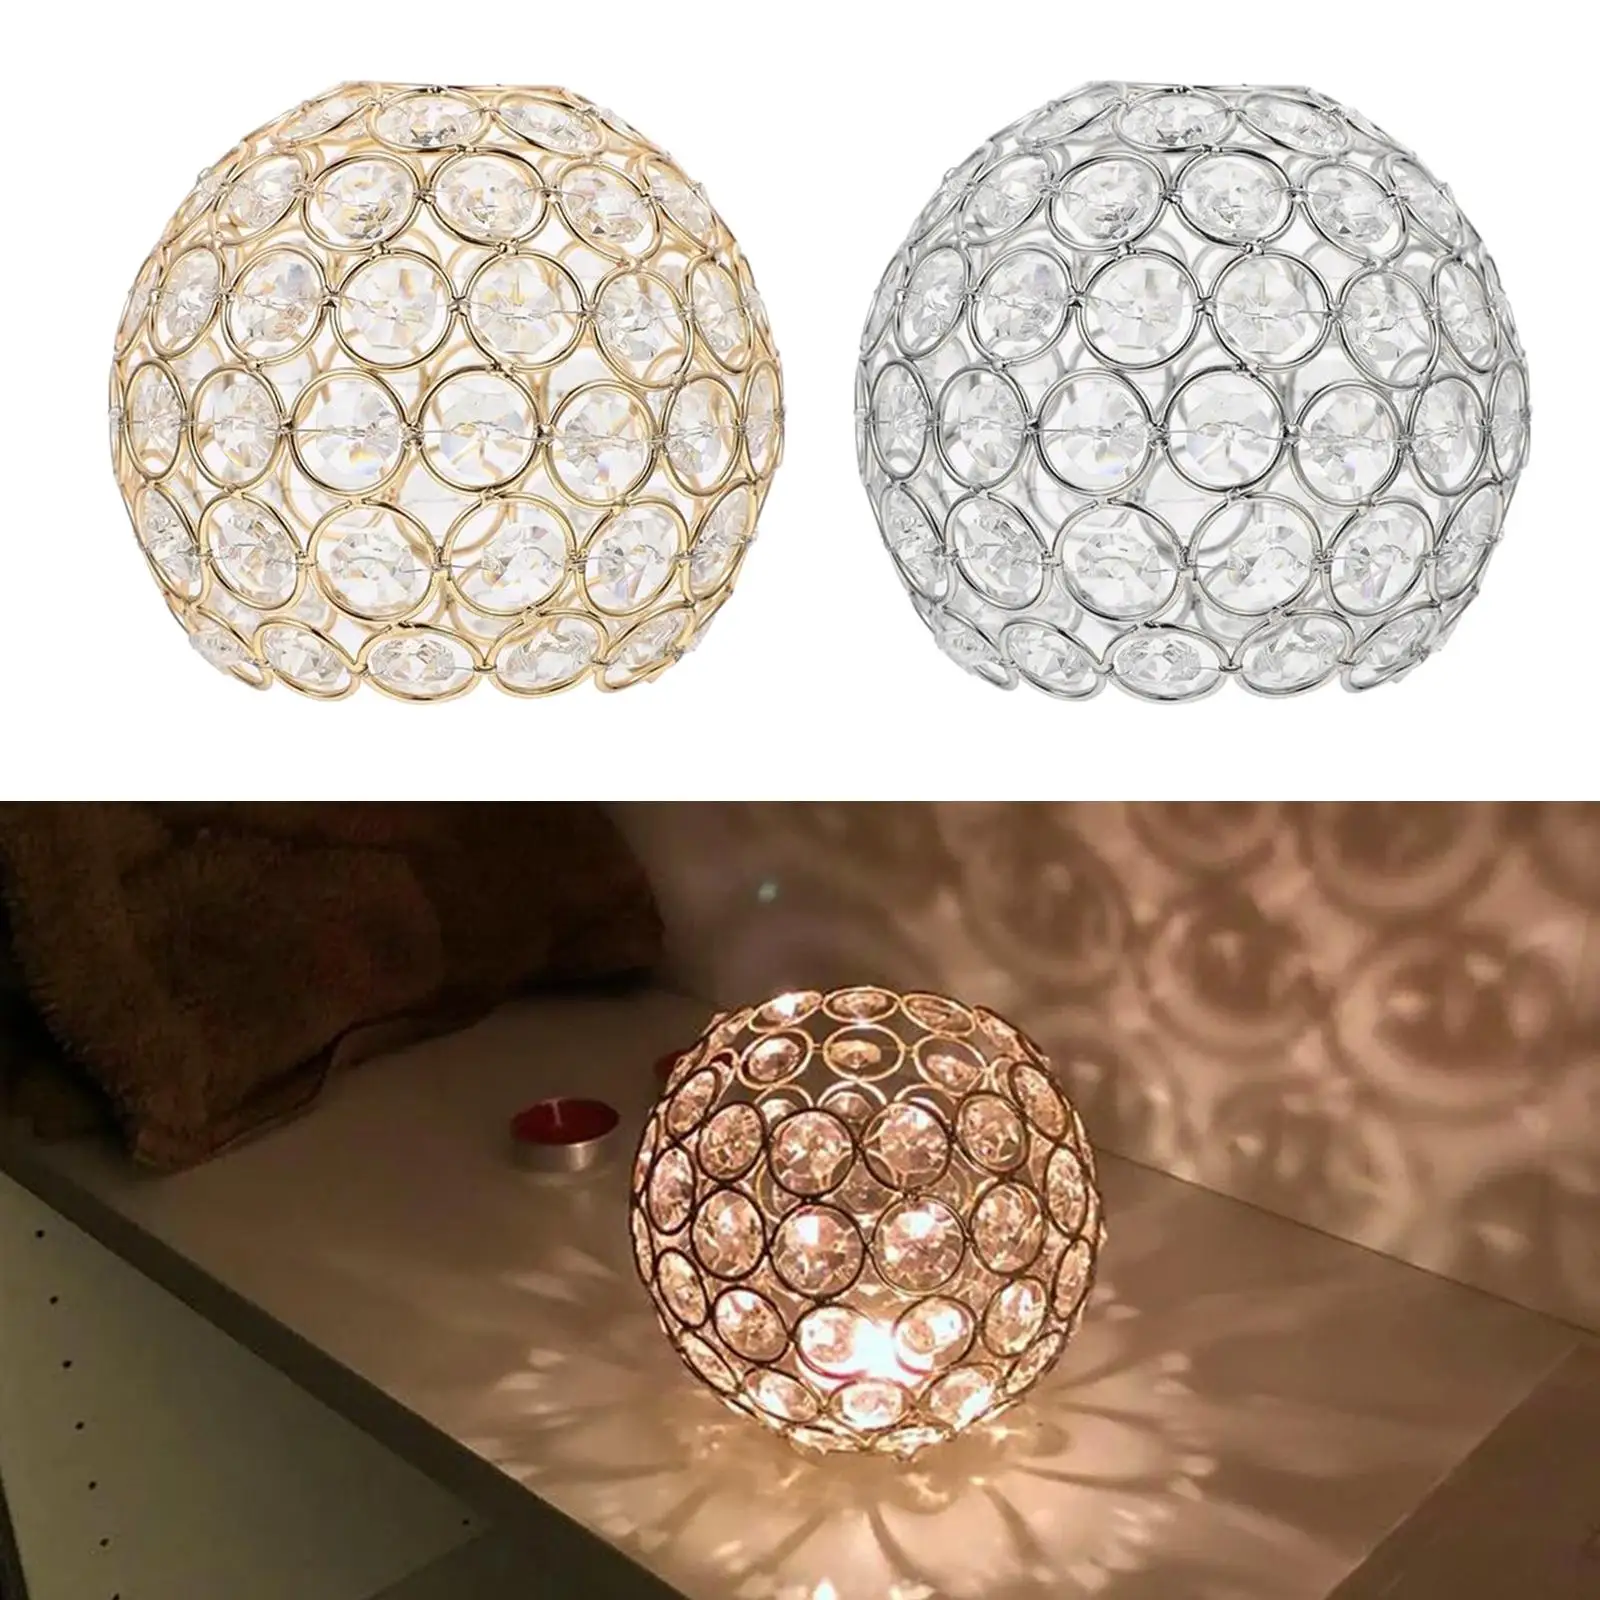 Classic Ceiling Light Shade Replacement Cover Office Crystal Lampshade Only